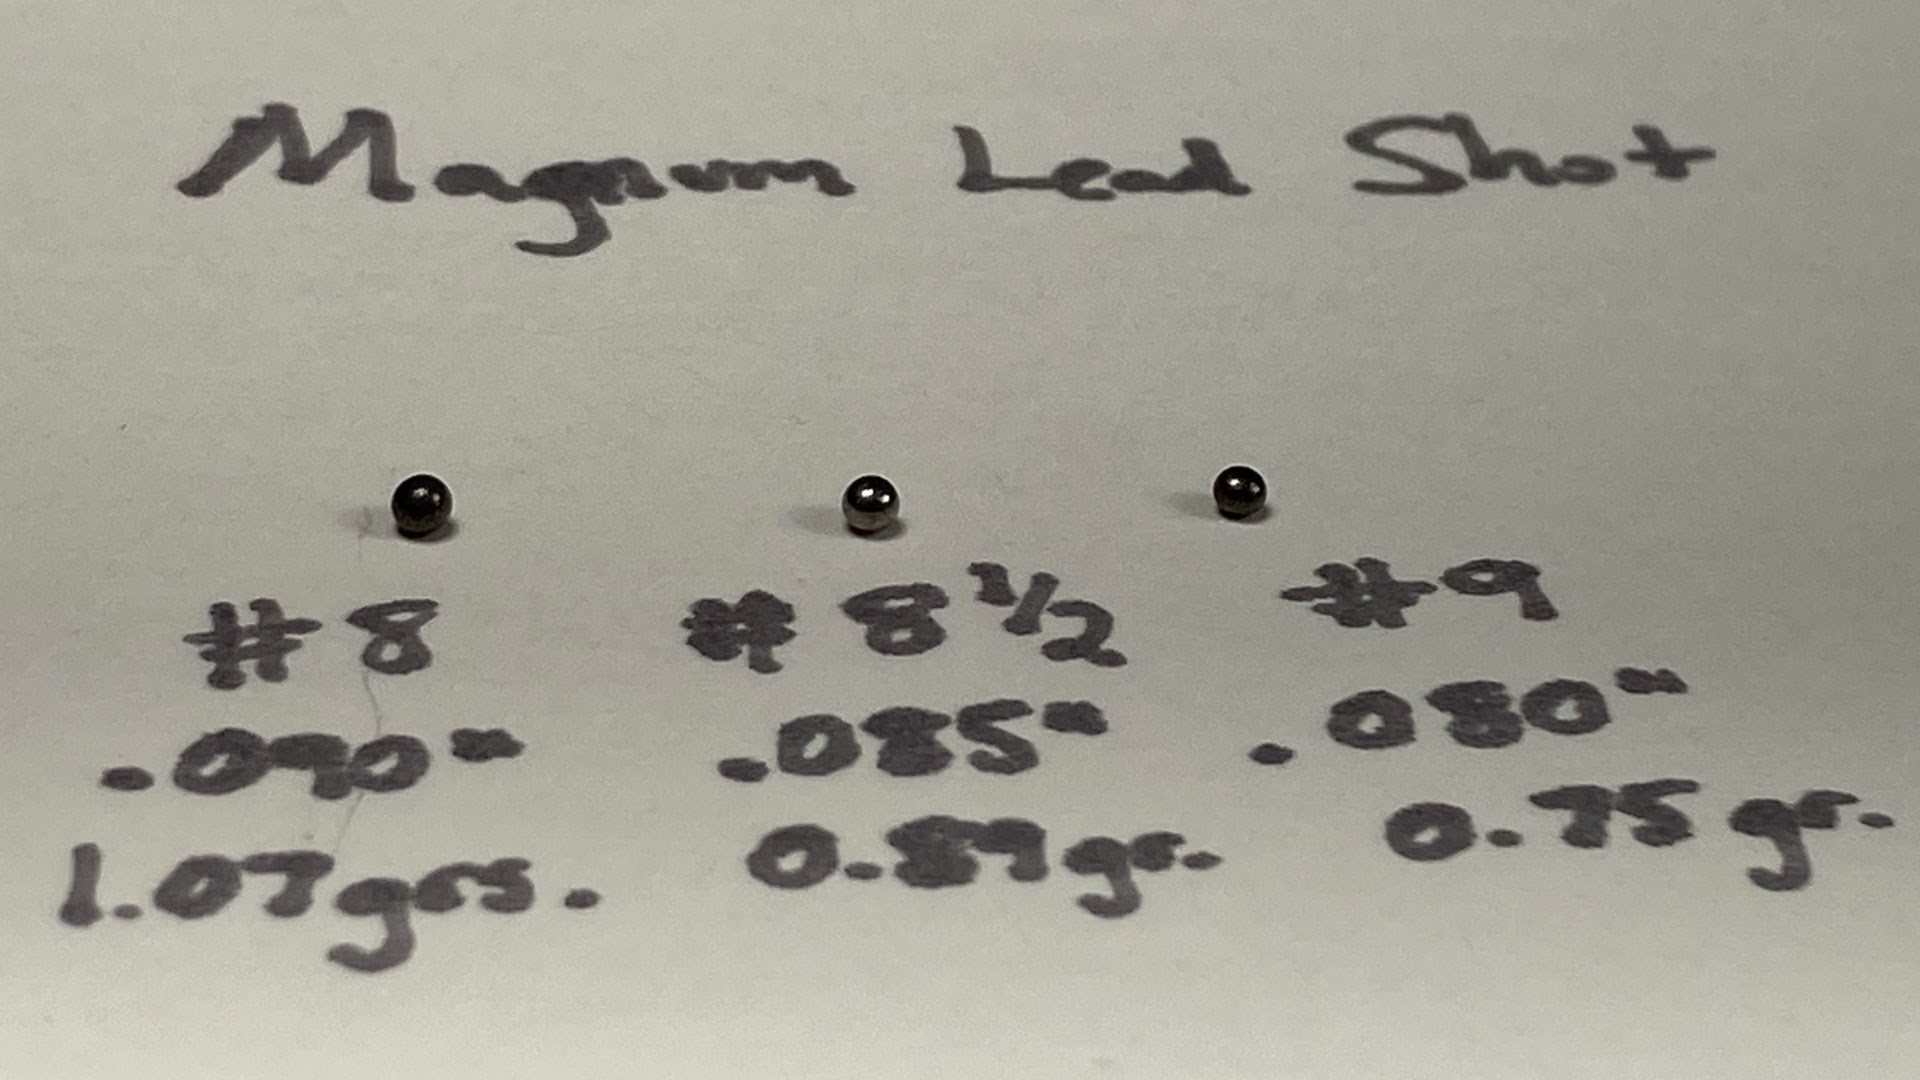 Examples of Magnum lead shot (8, 8.5 and 9)